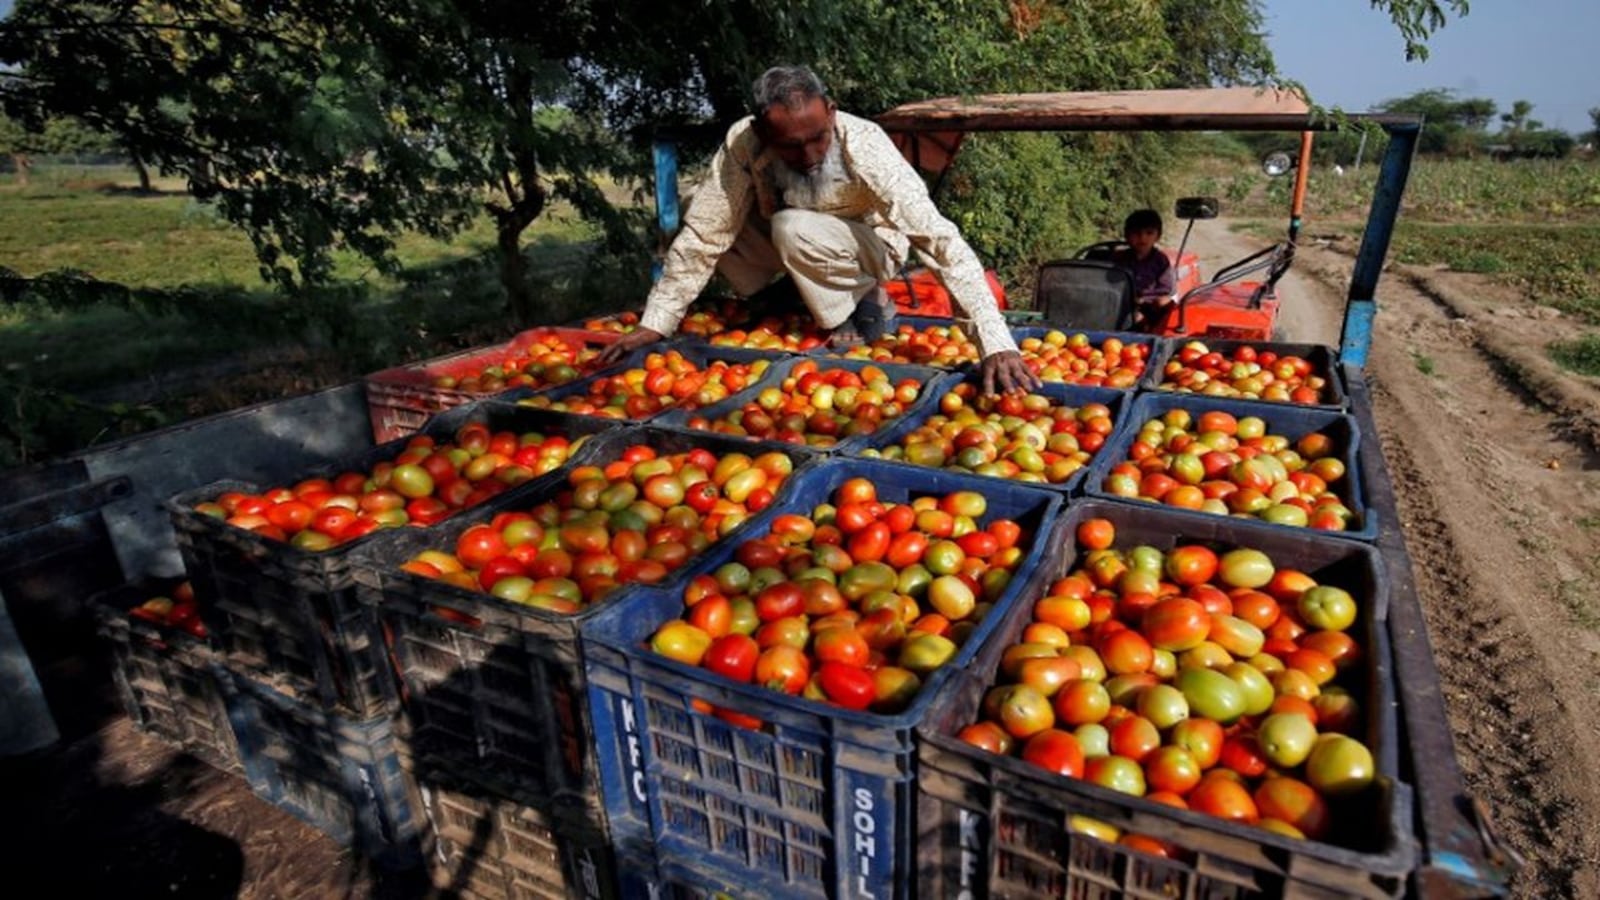 Tomato prices soar high; cross Rs 80-100/kg mark across several cities